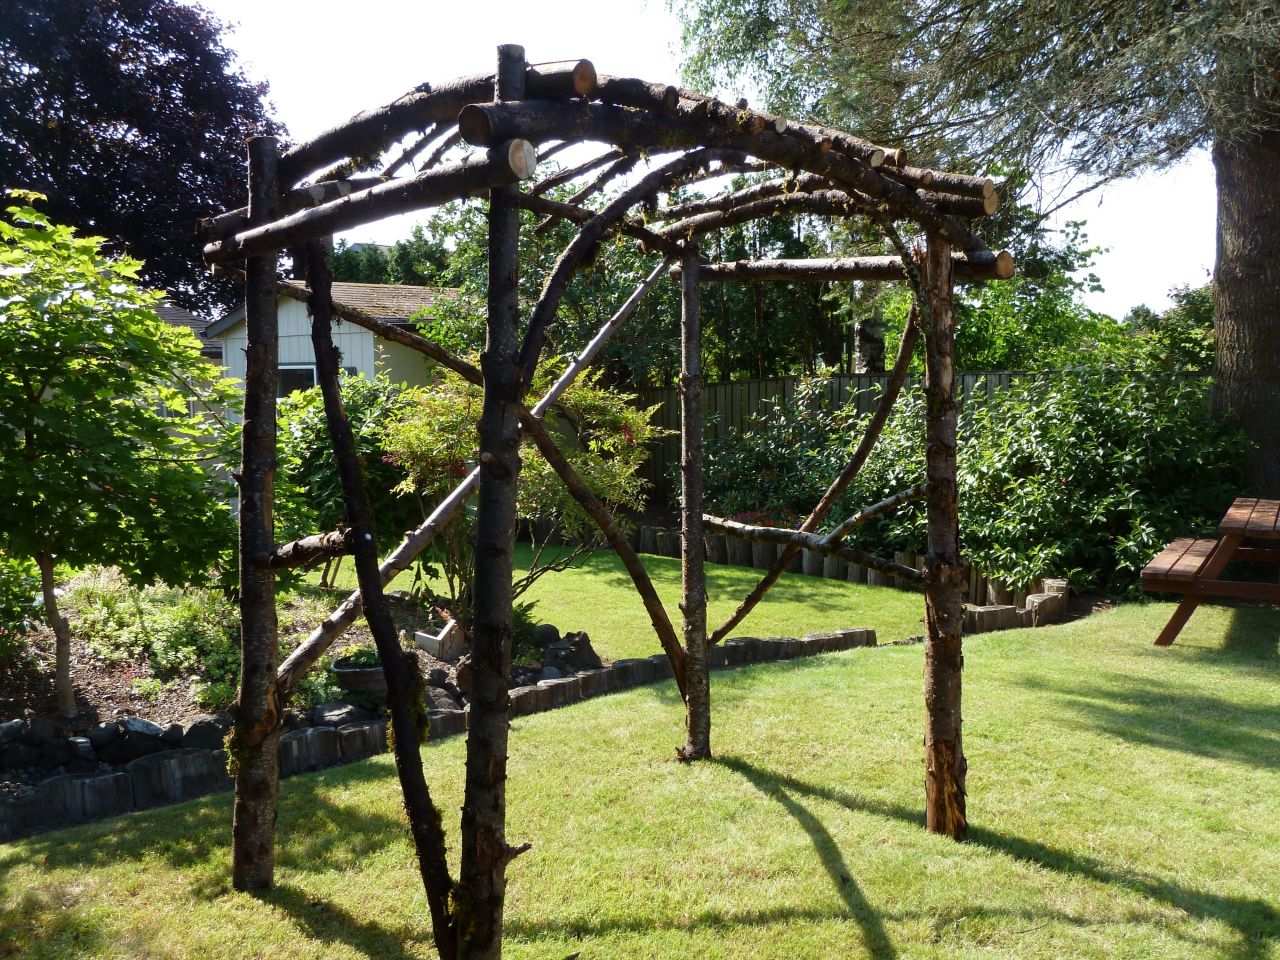 Garden arbour made from twigs